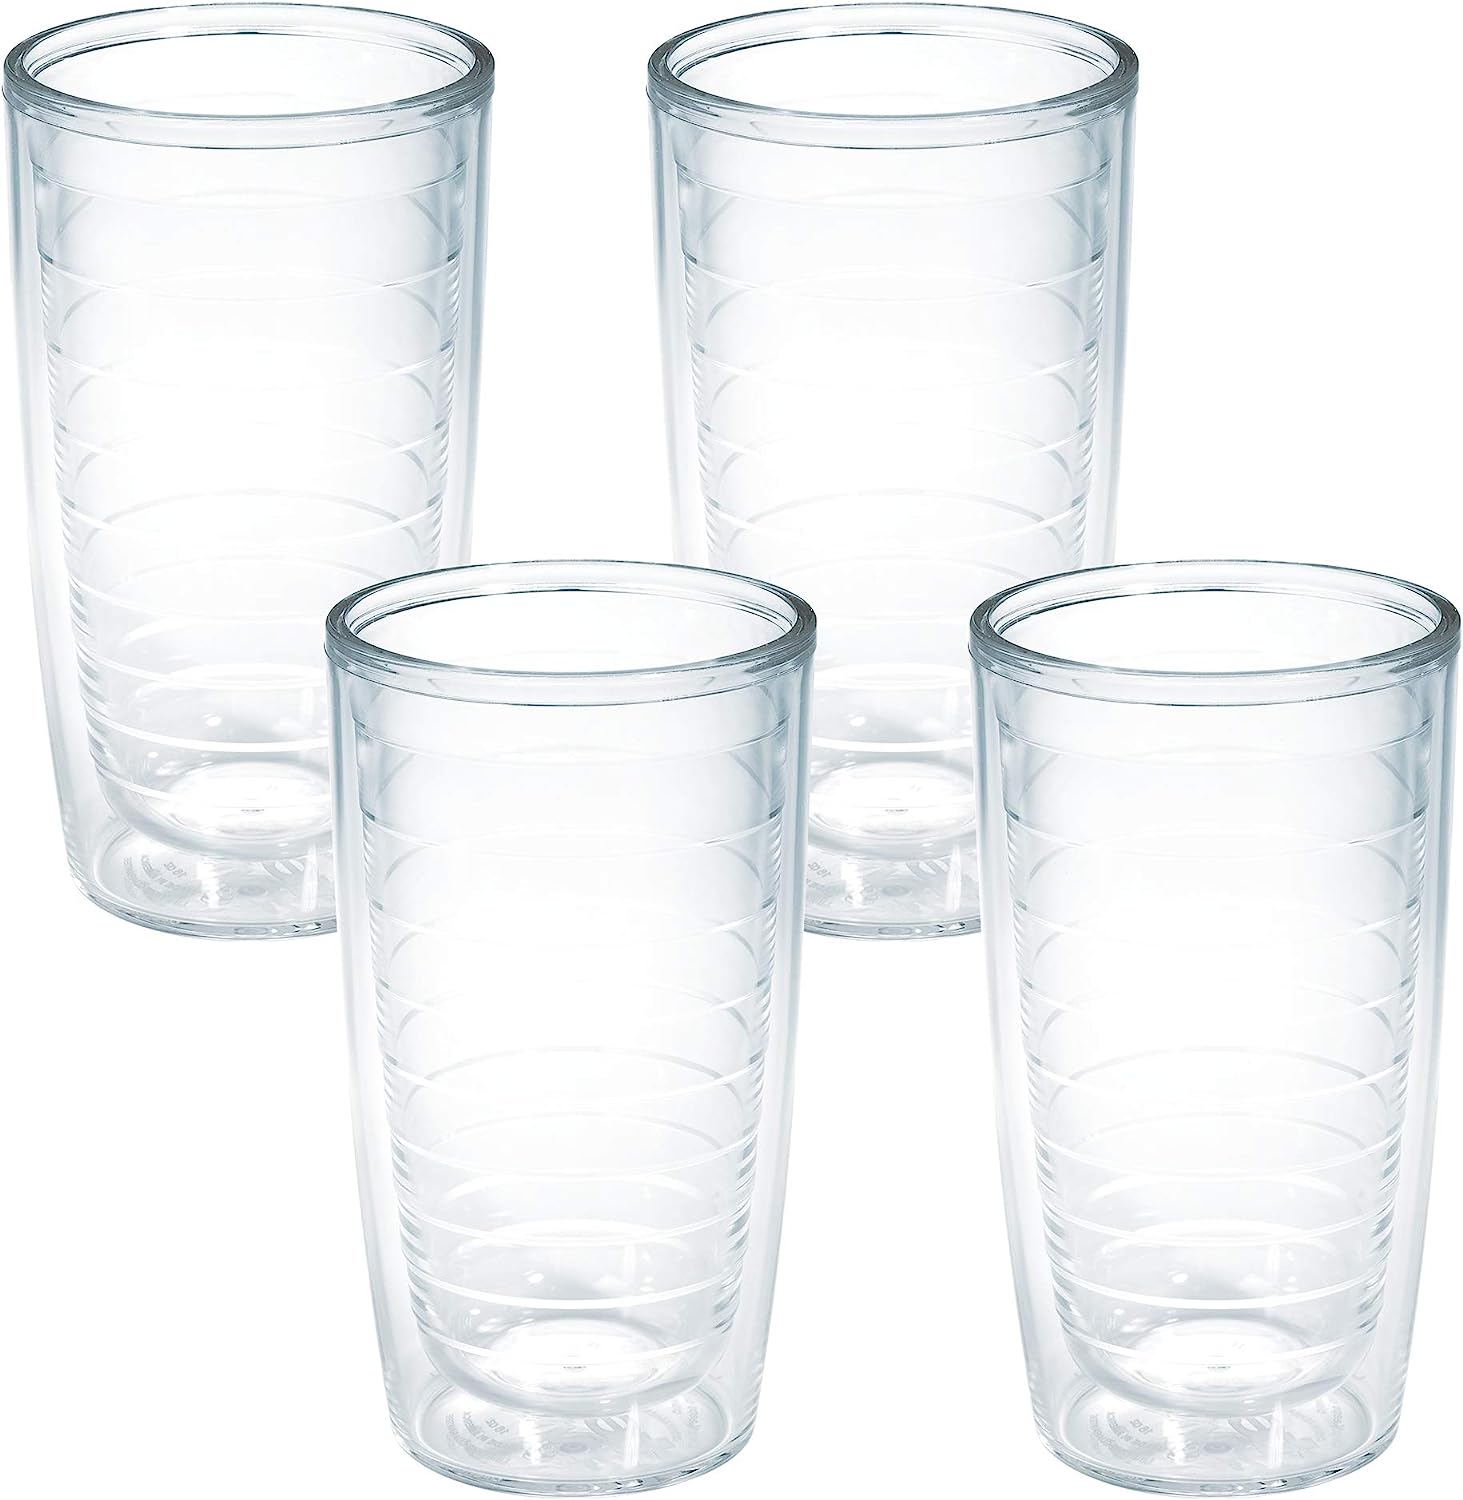 Tervis Made in USA Double Walled Clear & Colorful [...]